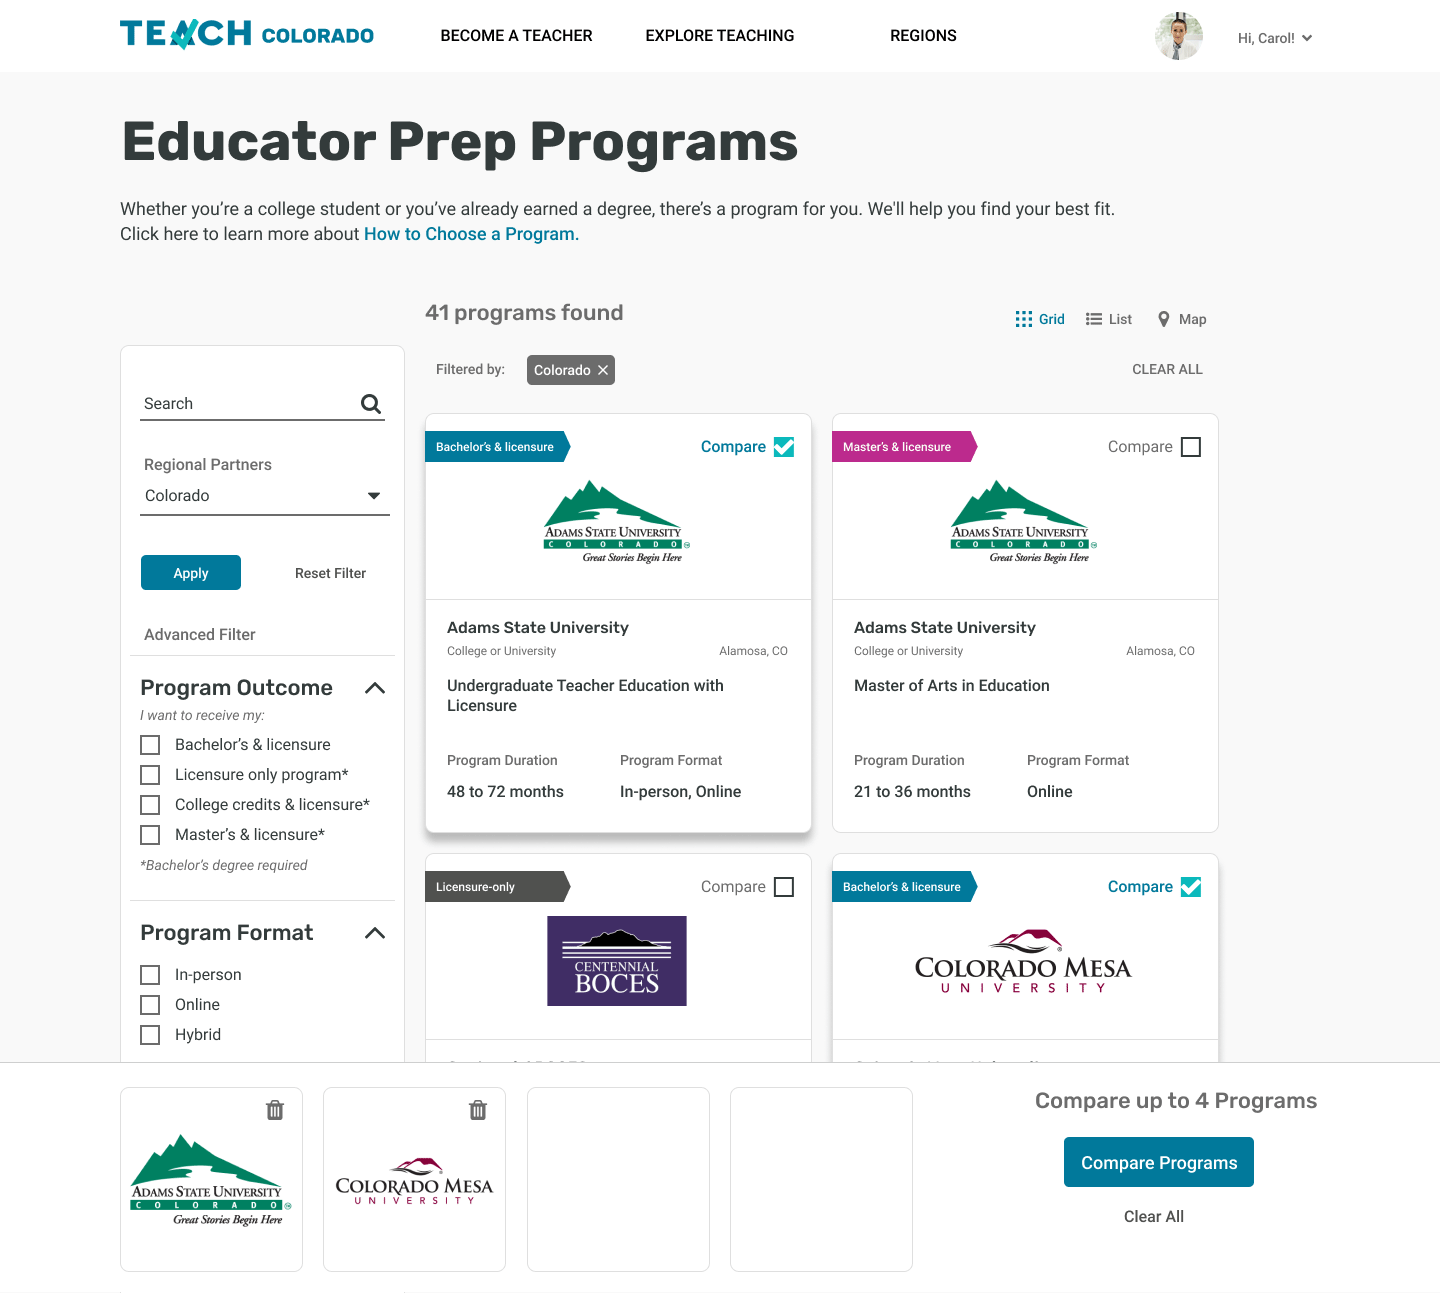 Updated EPP Explorer page with Compare tool